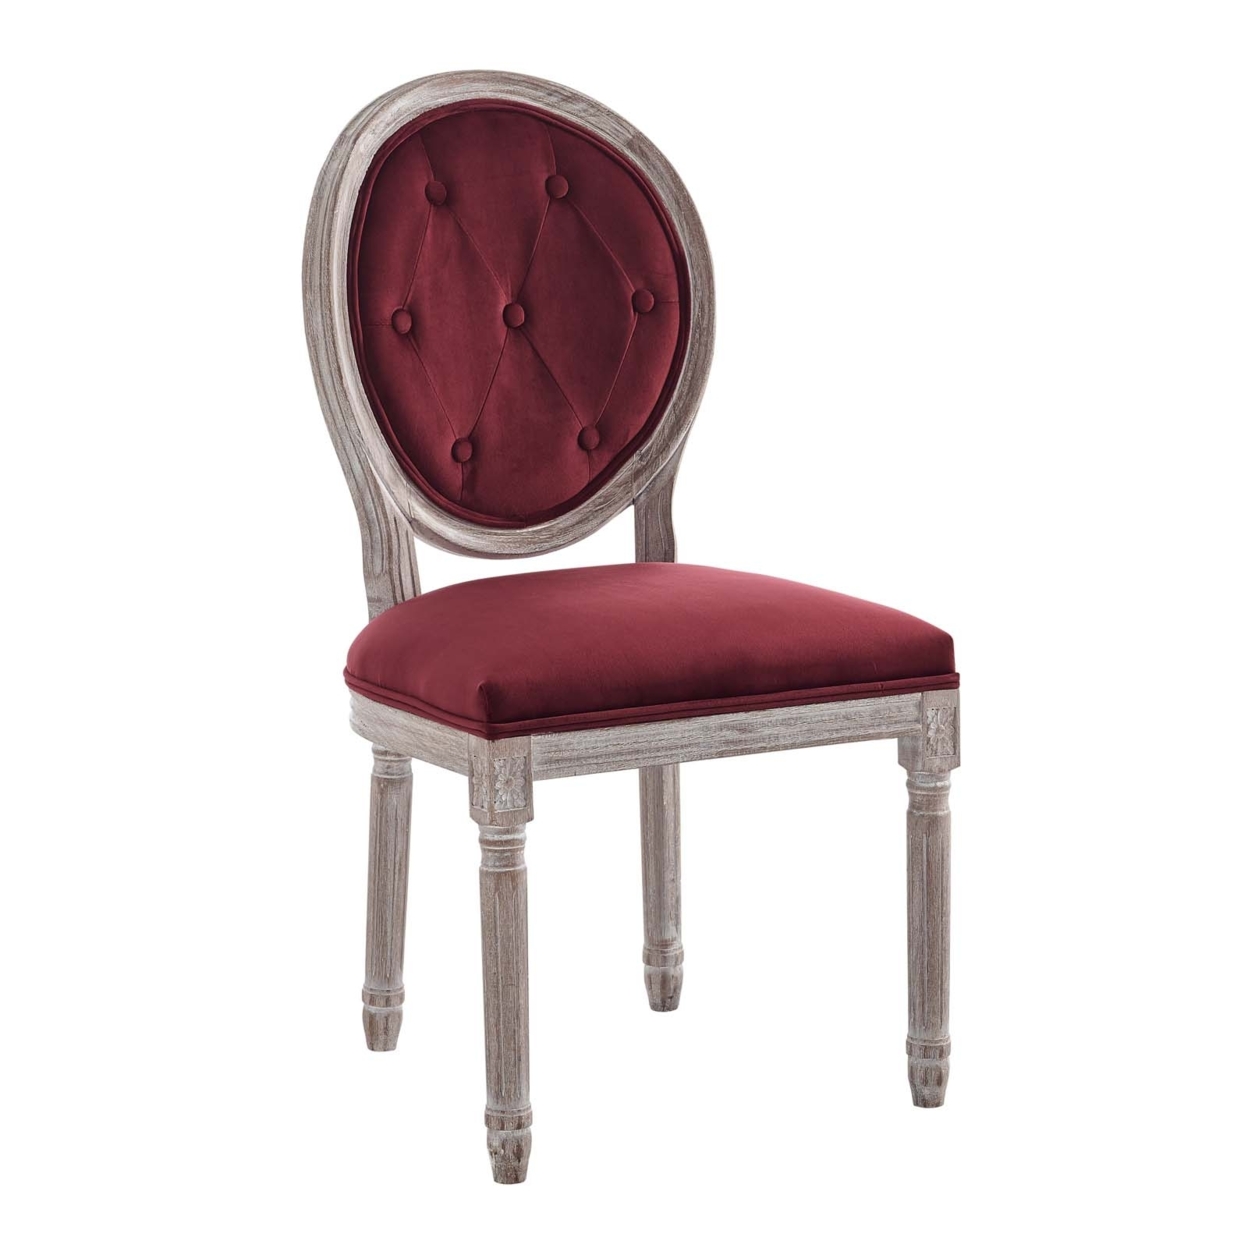 Arise Vintage French Performance Velvet Dining Side Chair, Natural Maroon